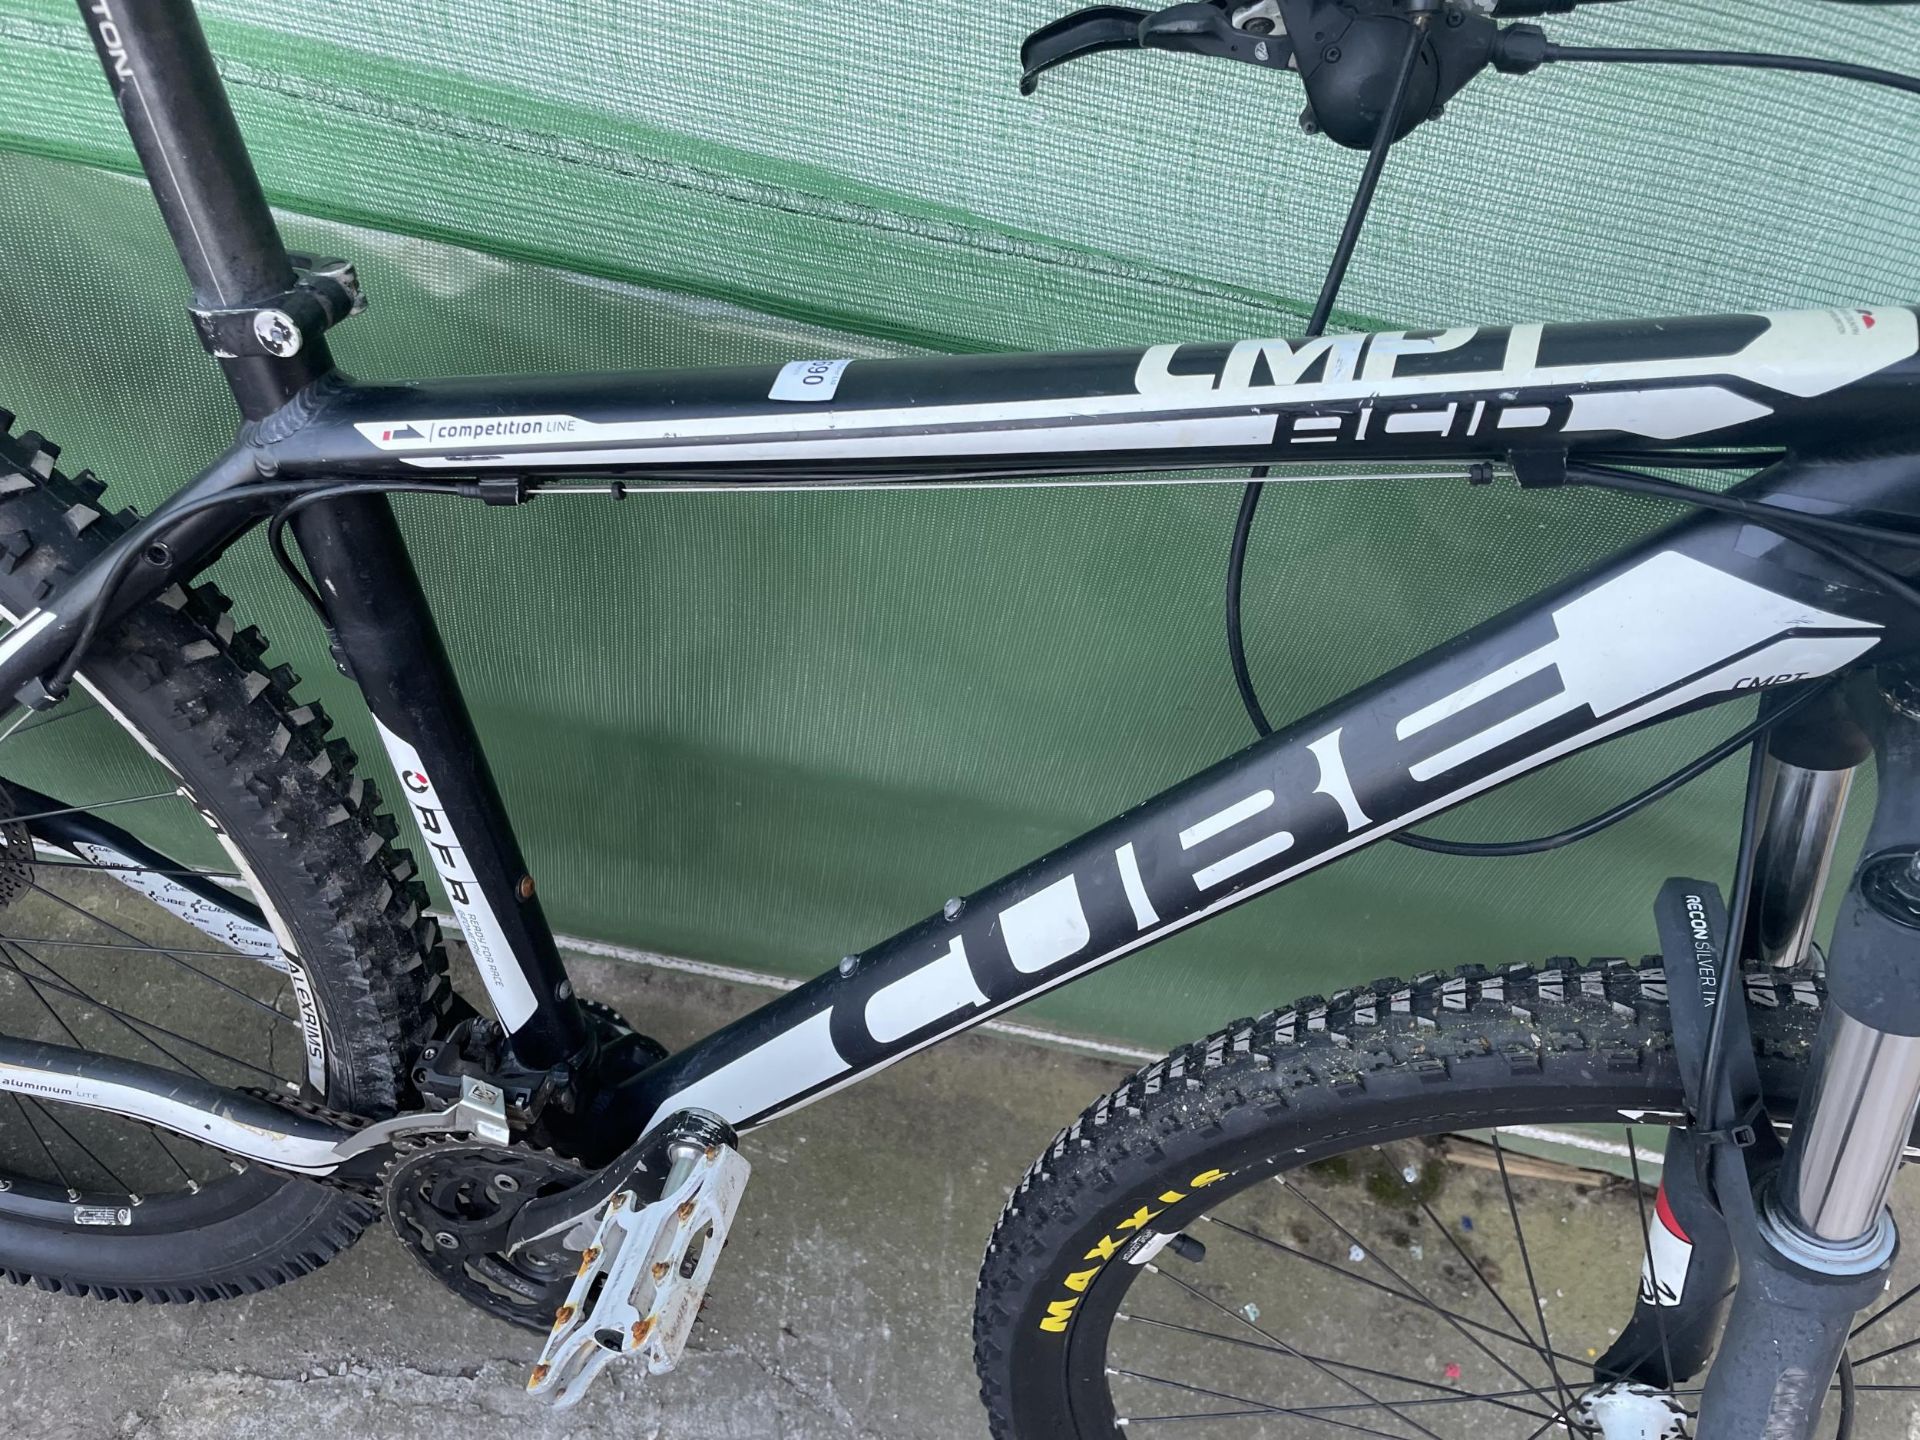 A CMPT CUBE MOUNTAIN BIKE WITH FRONT SUSPENSION AND 30 SPEED GEAR SYSTEM - Image 2 of 4